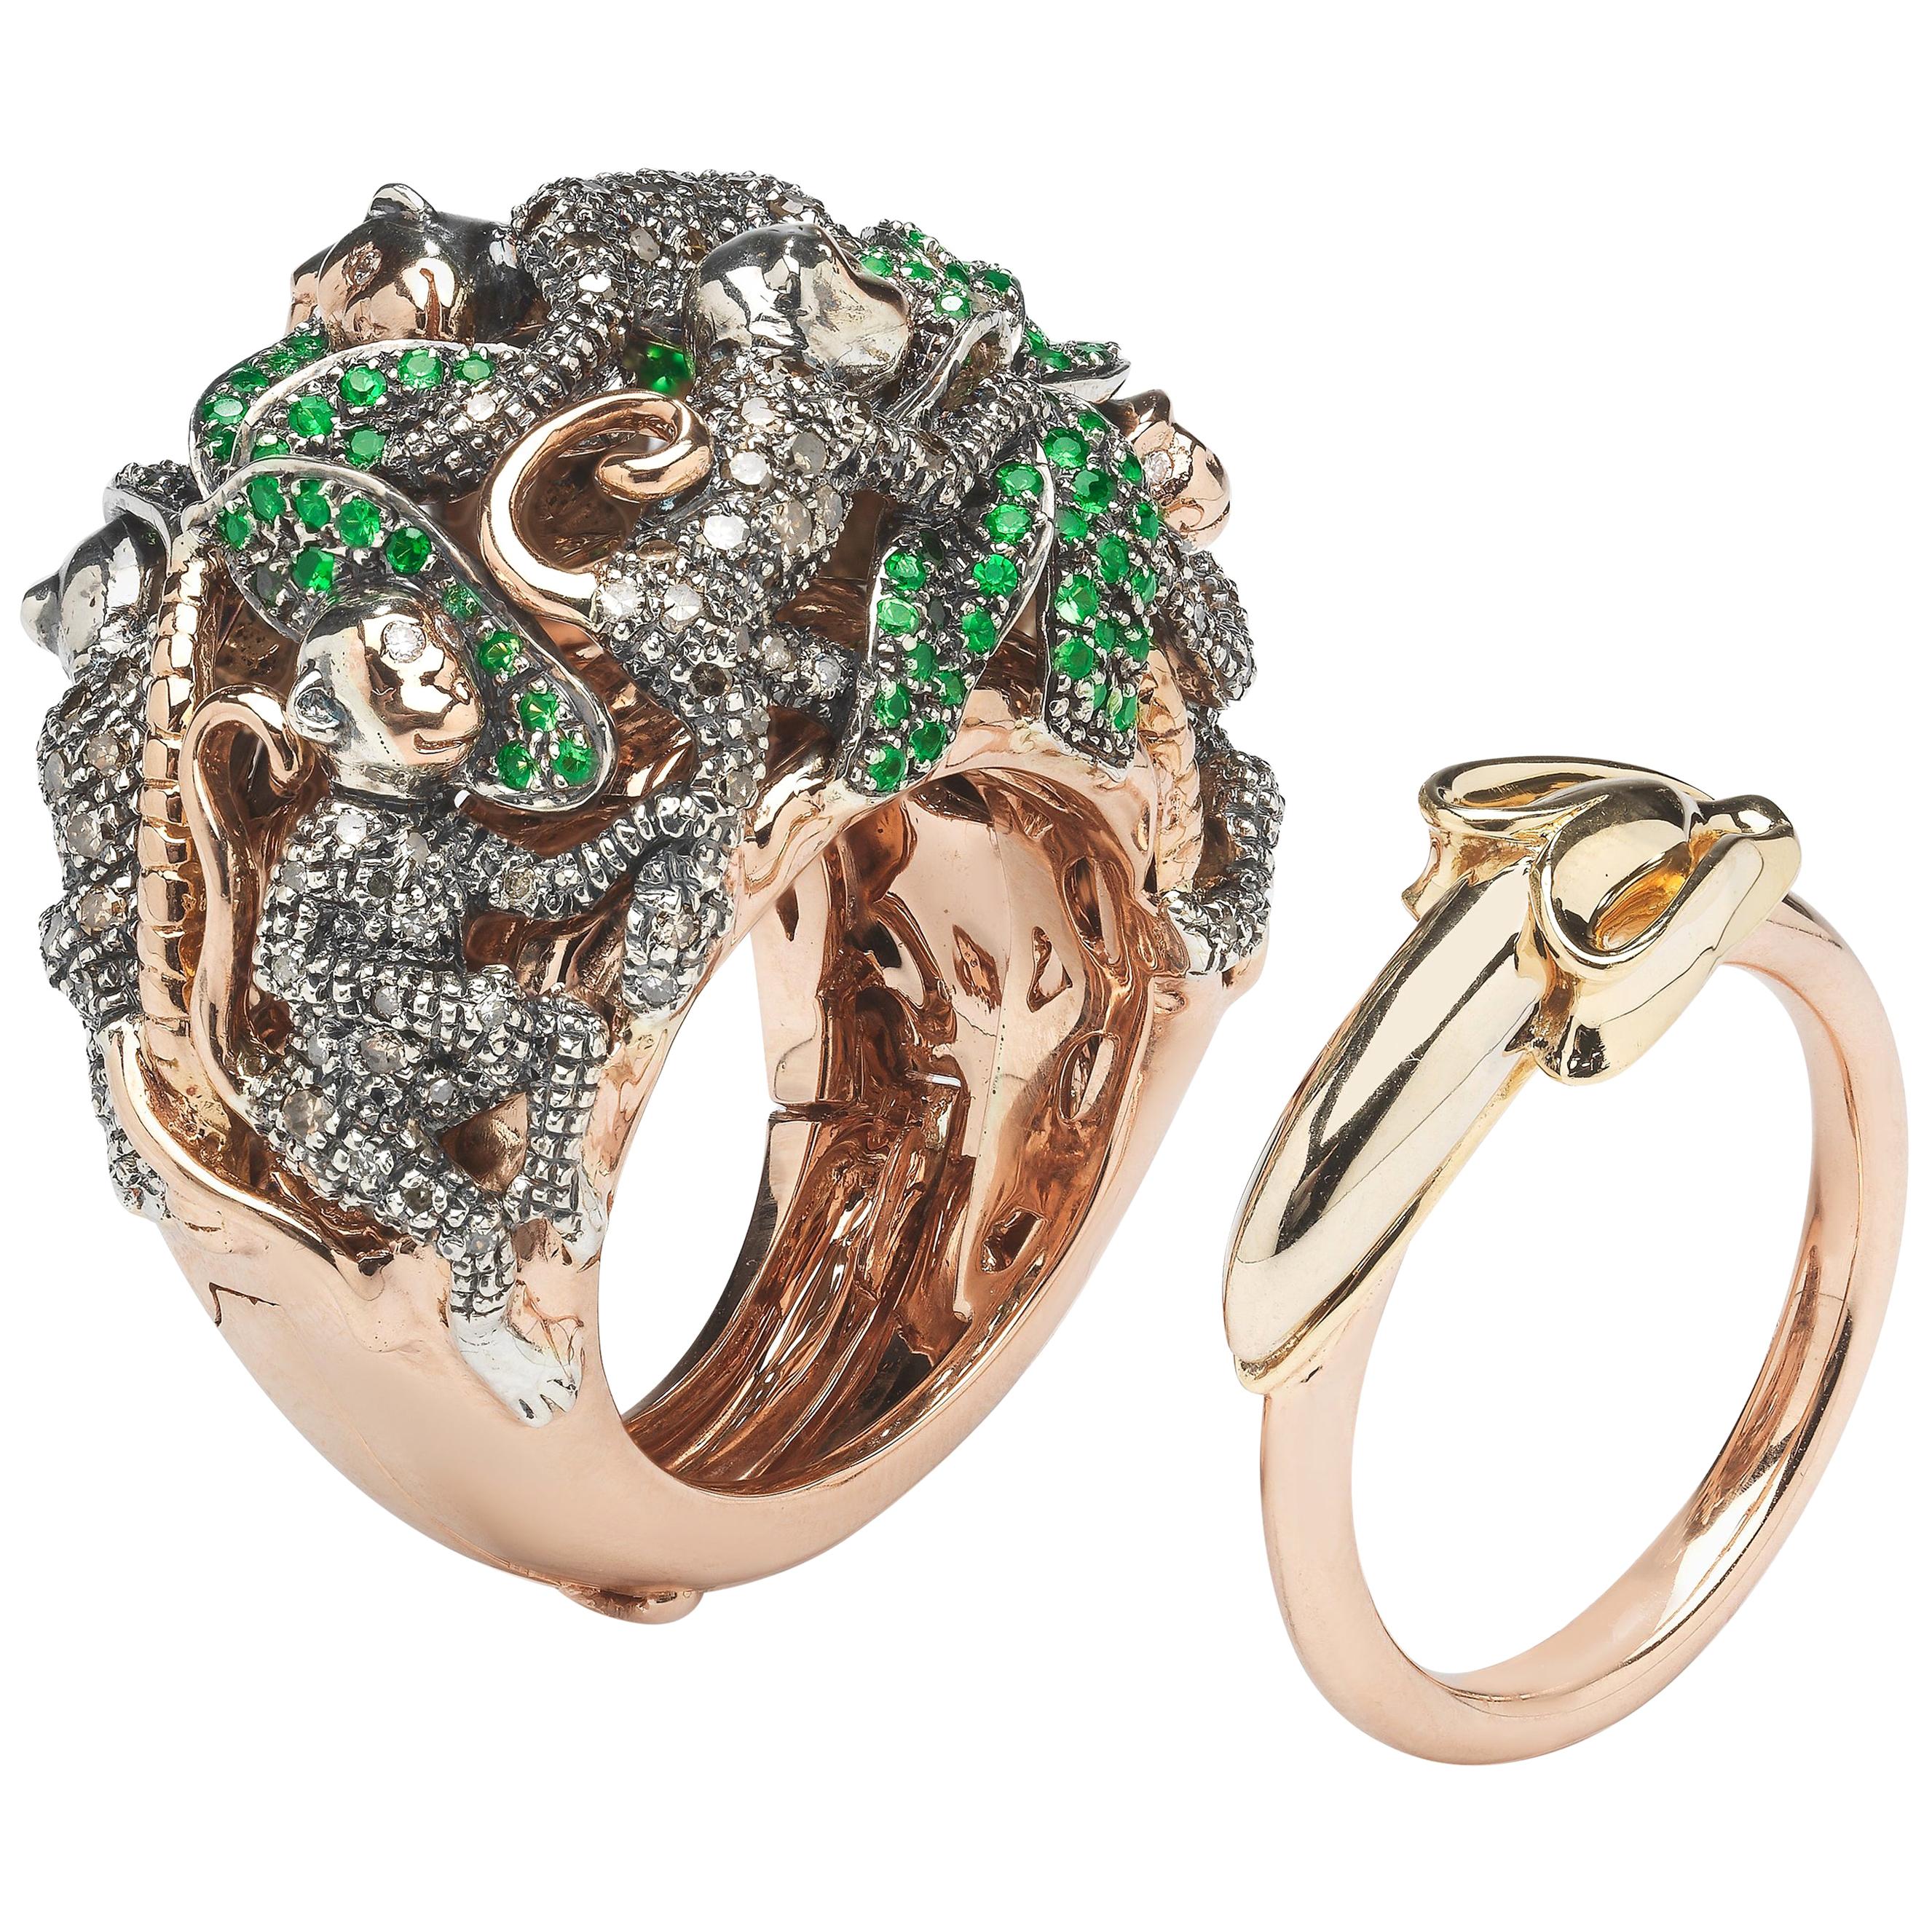 Monkey Ring in a Ring 18k Rose Gold and Silver with Diamonds and Green Tsavorite For Sale